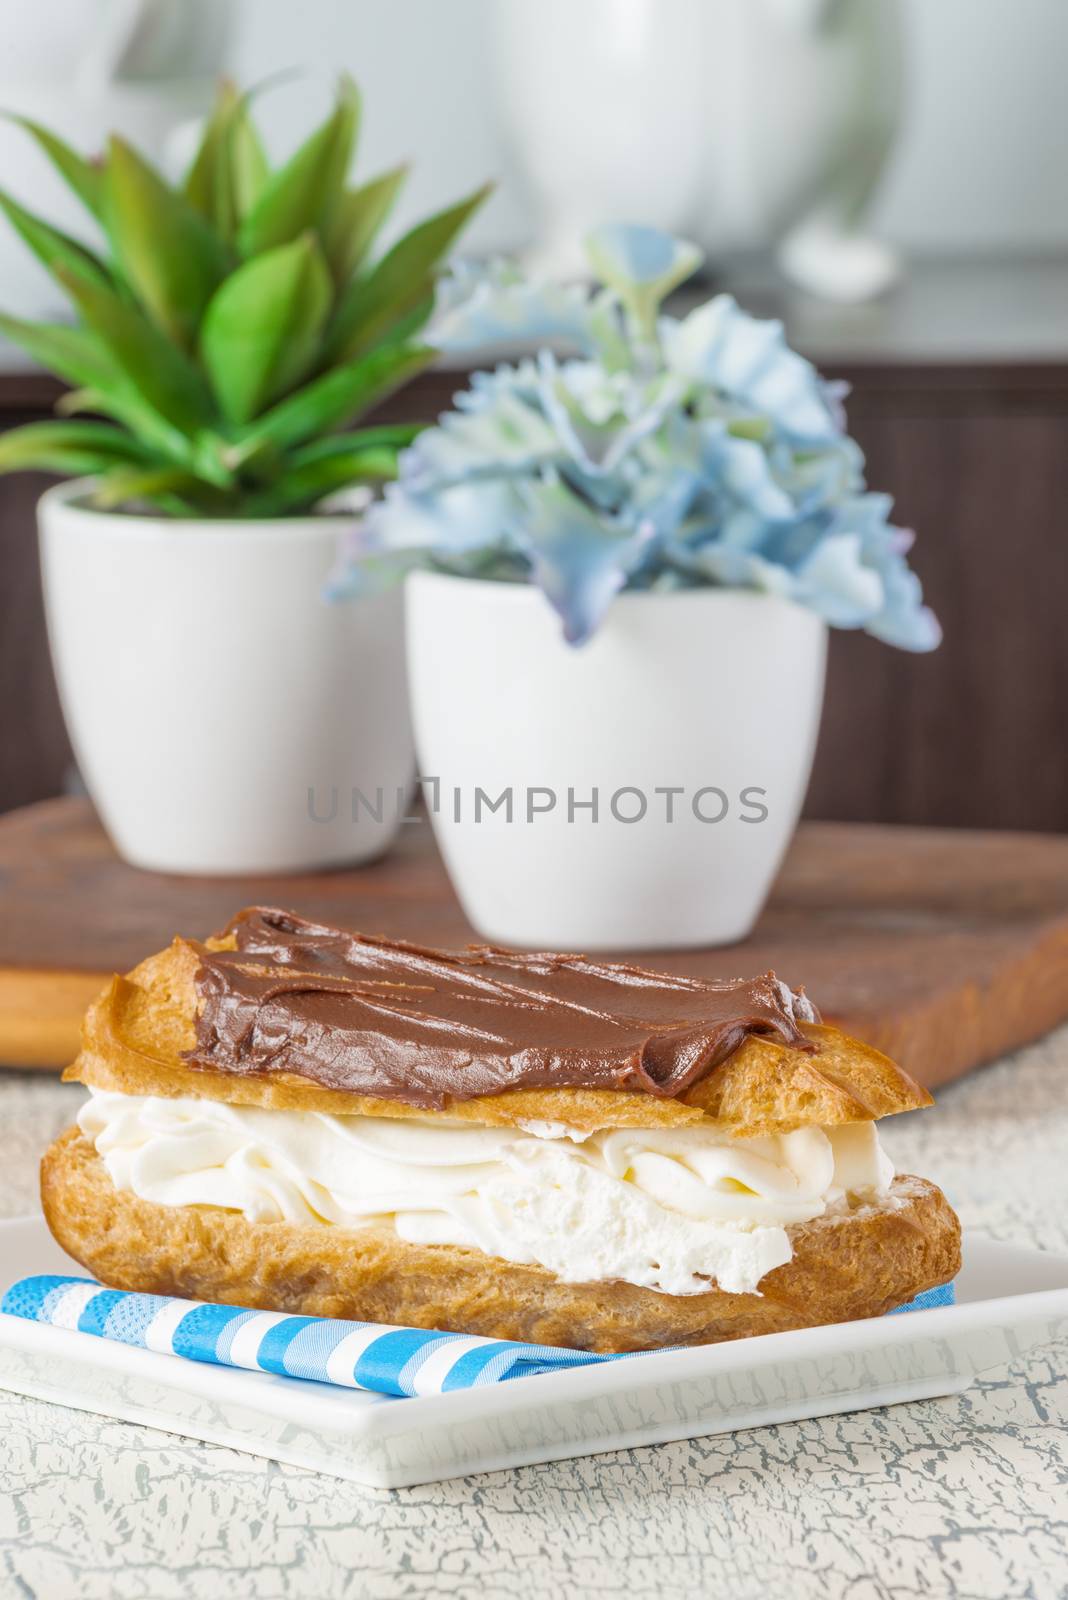 Delicious Chocolate Eclair by billberryphotography